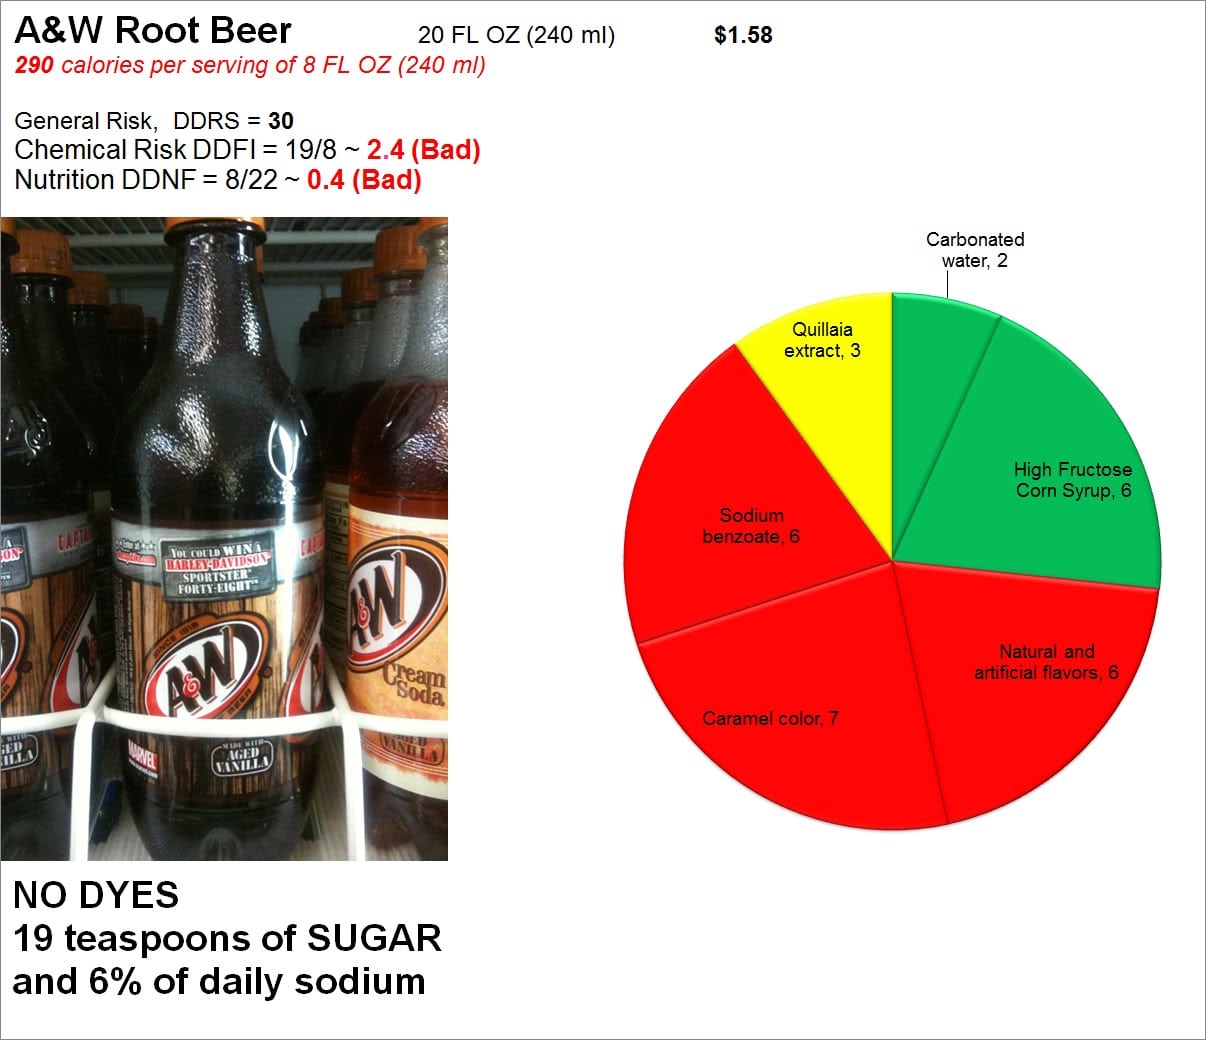 How Much Sugar In Aw Root Beer